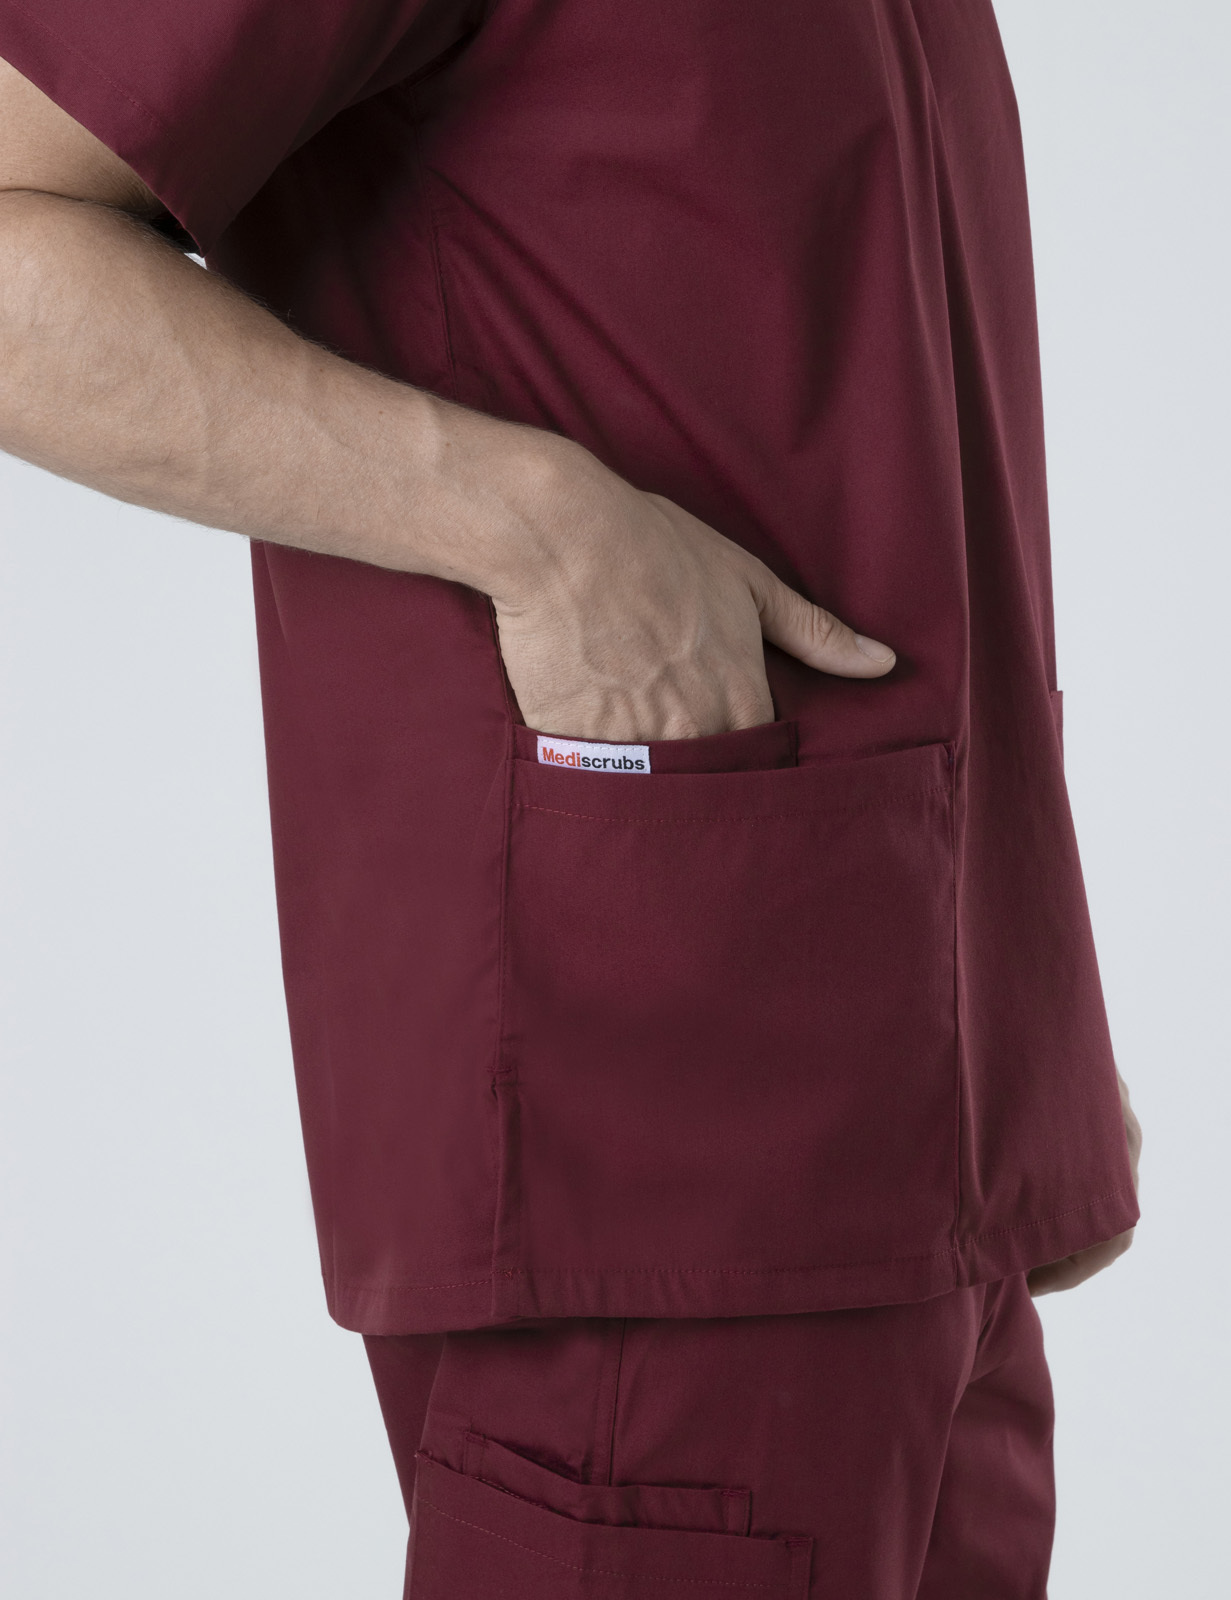 Men's Fit Solid Scrub Top - Burgundy - X Large - 1